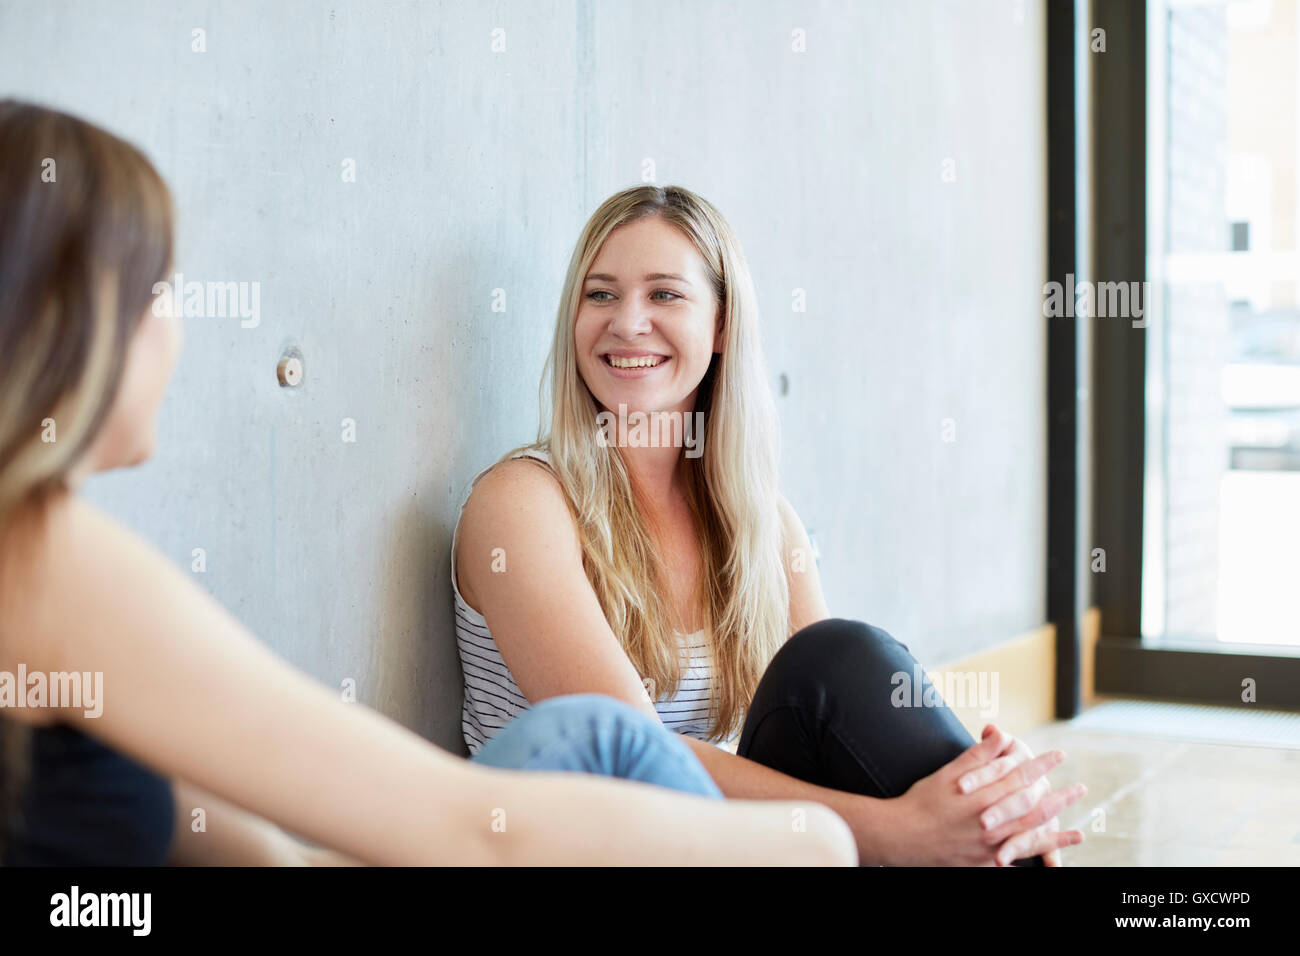 Two young female students sitting on floor chatting at higher education college Stock Photo